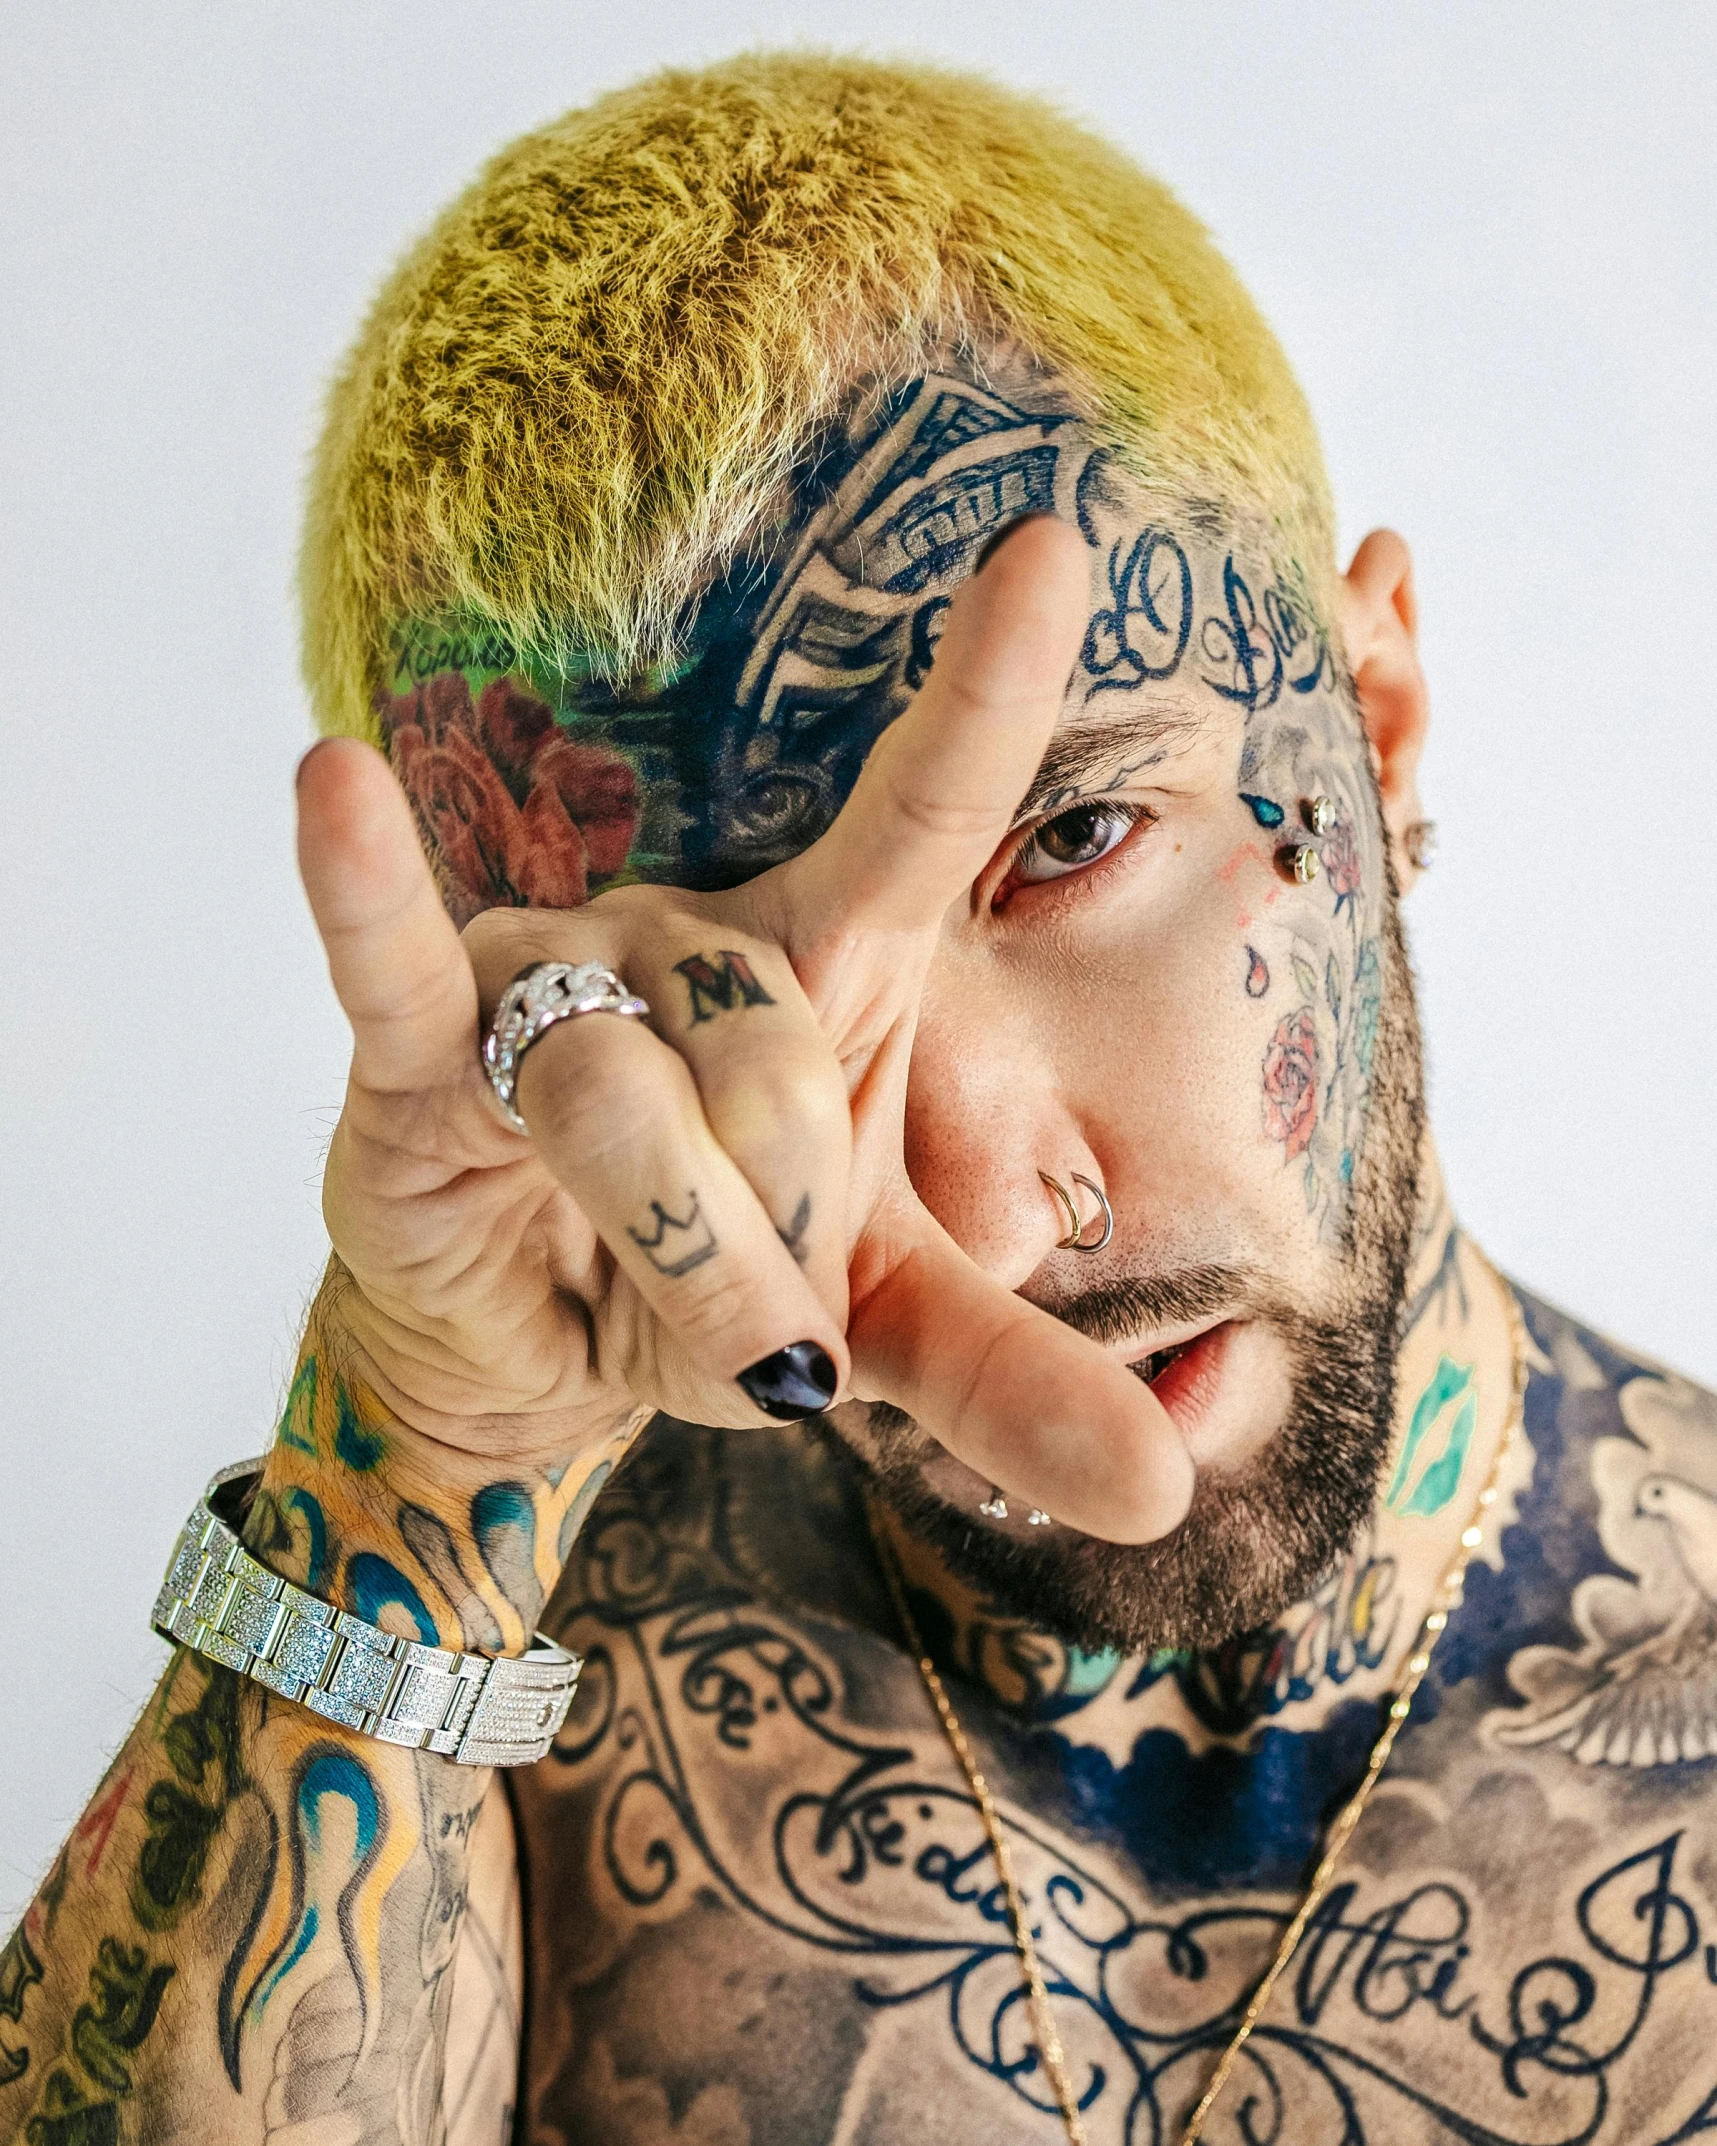 tattooed man posing for the camera while holding up his peace sign